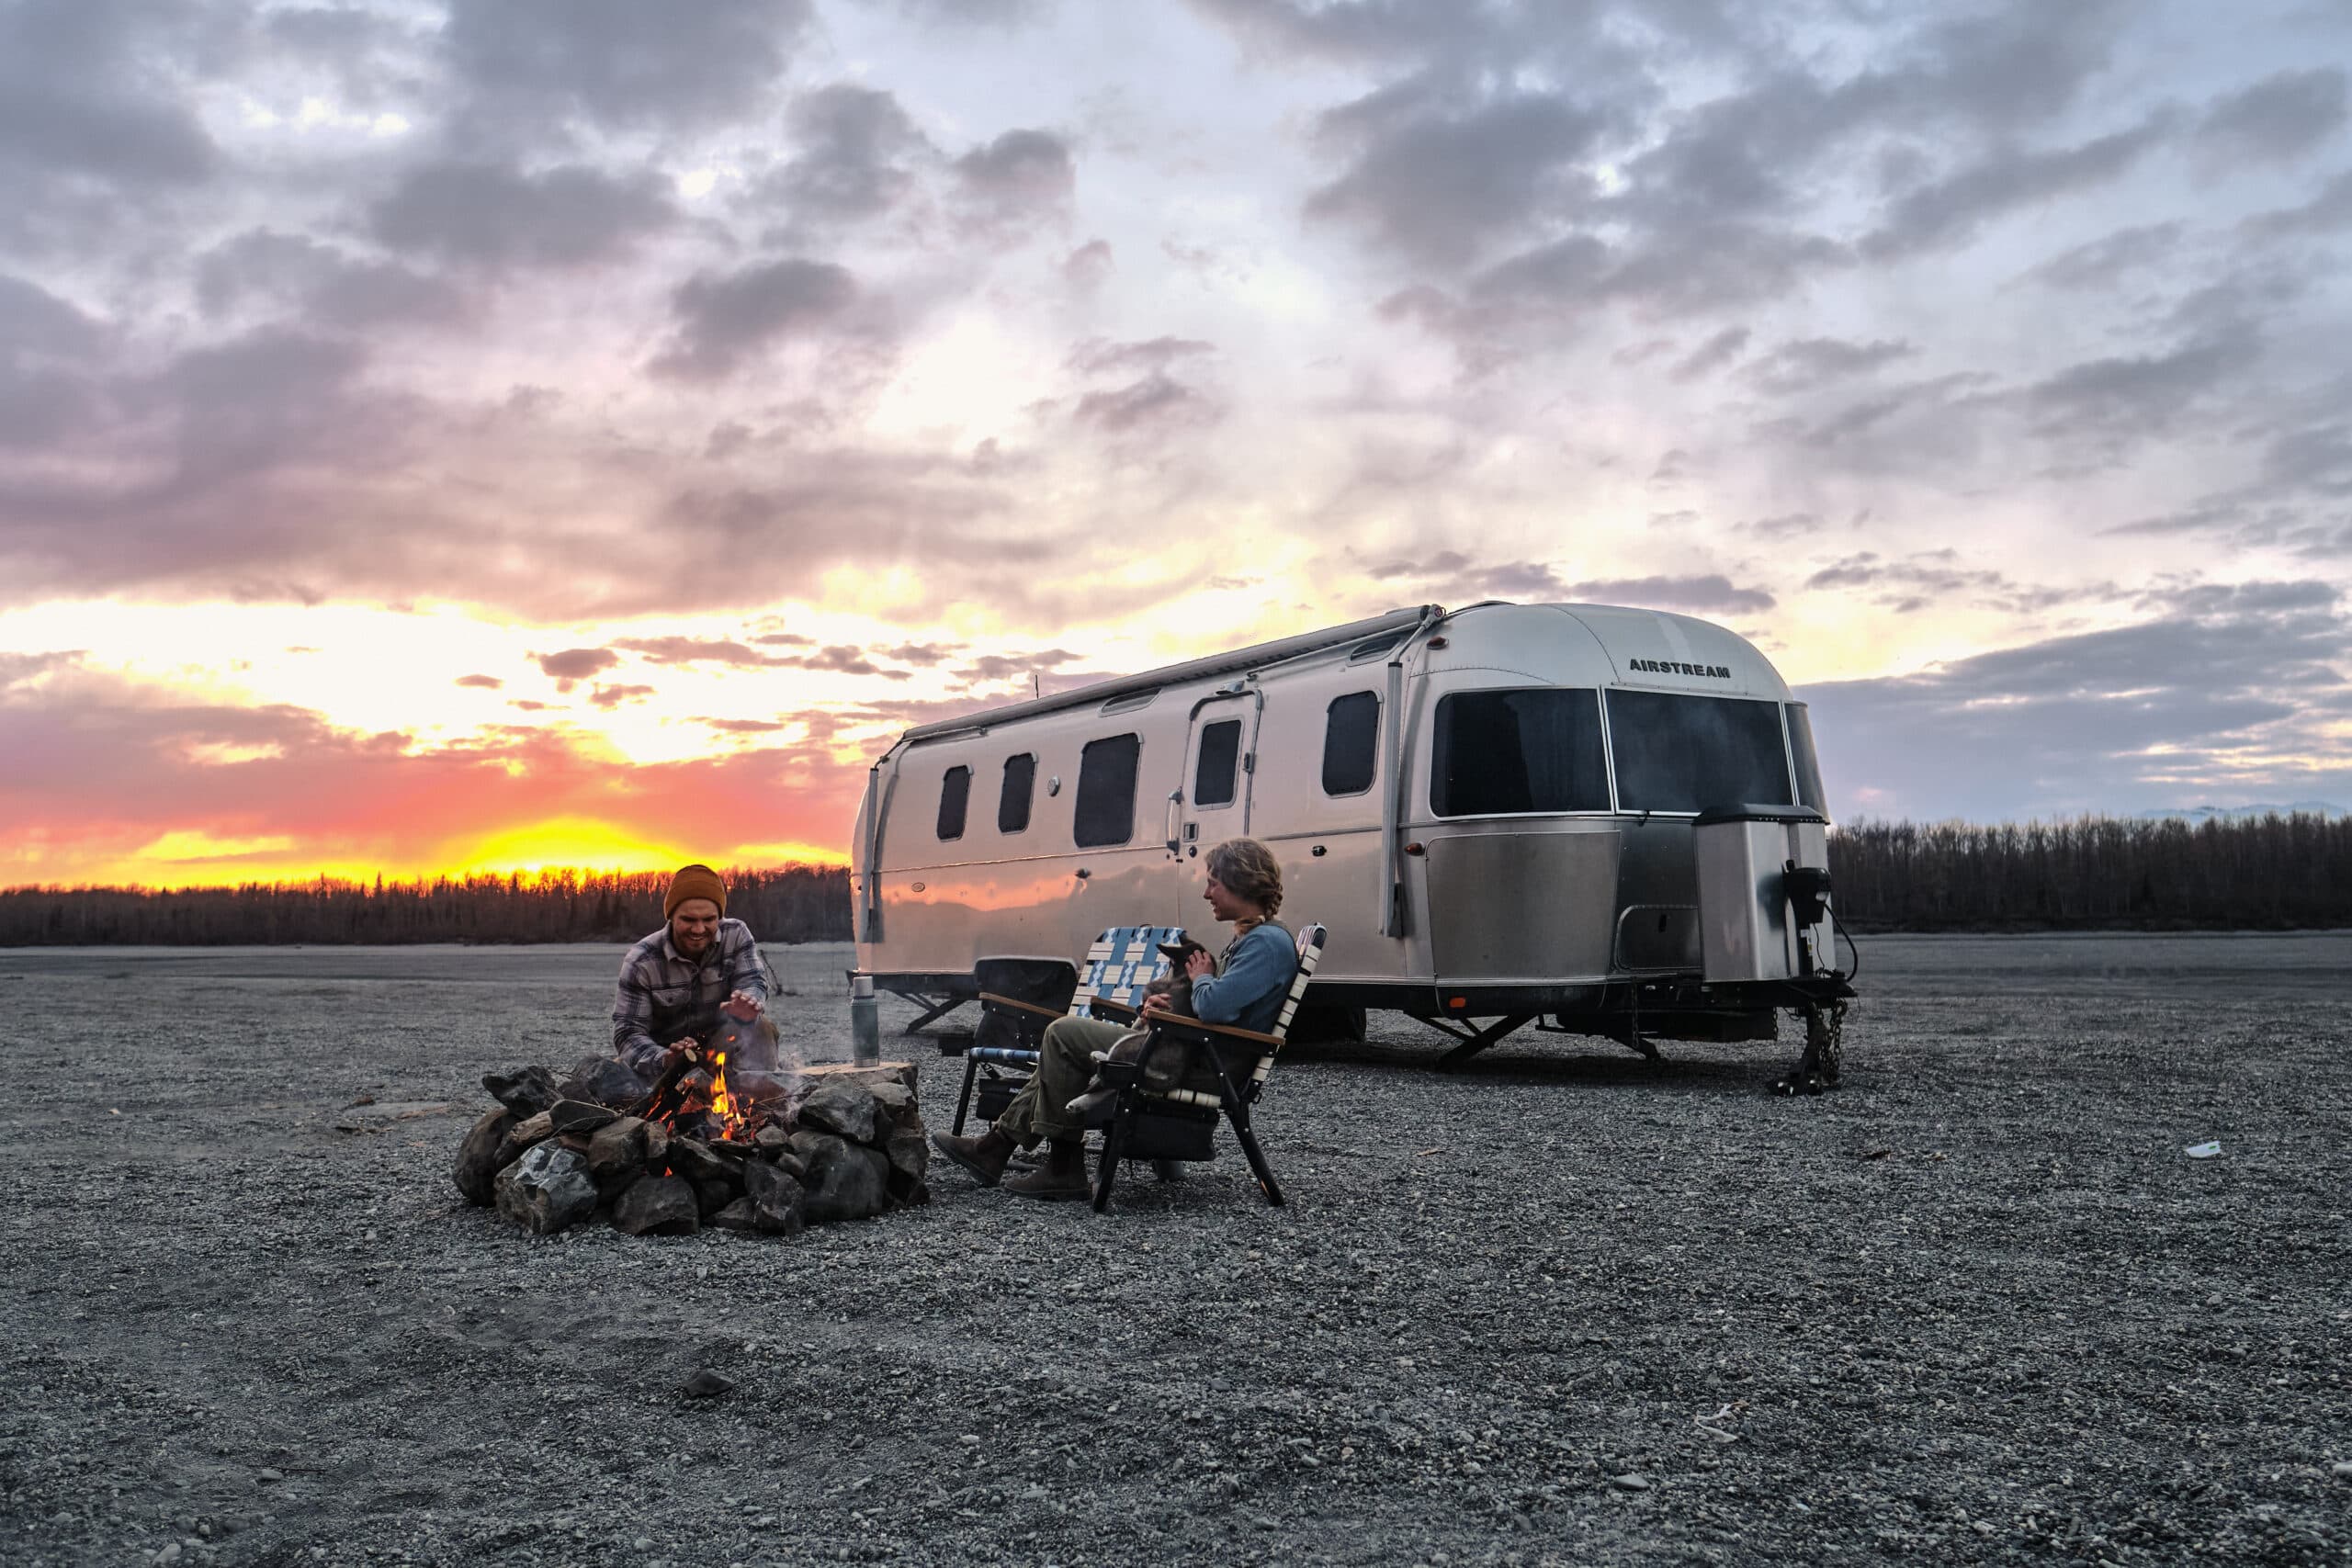 Couple camping with an Airstream in Alaska